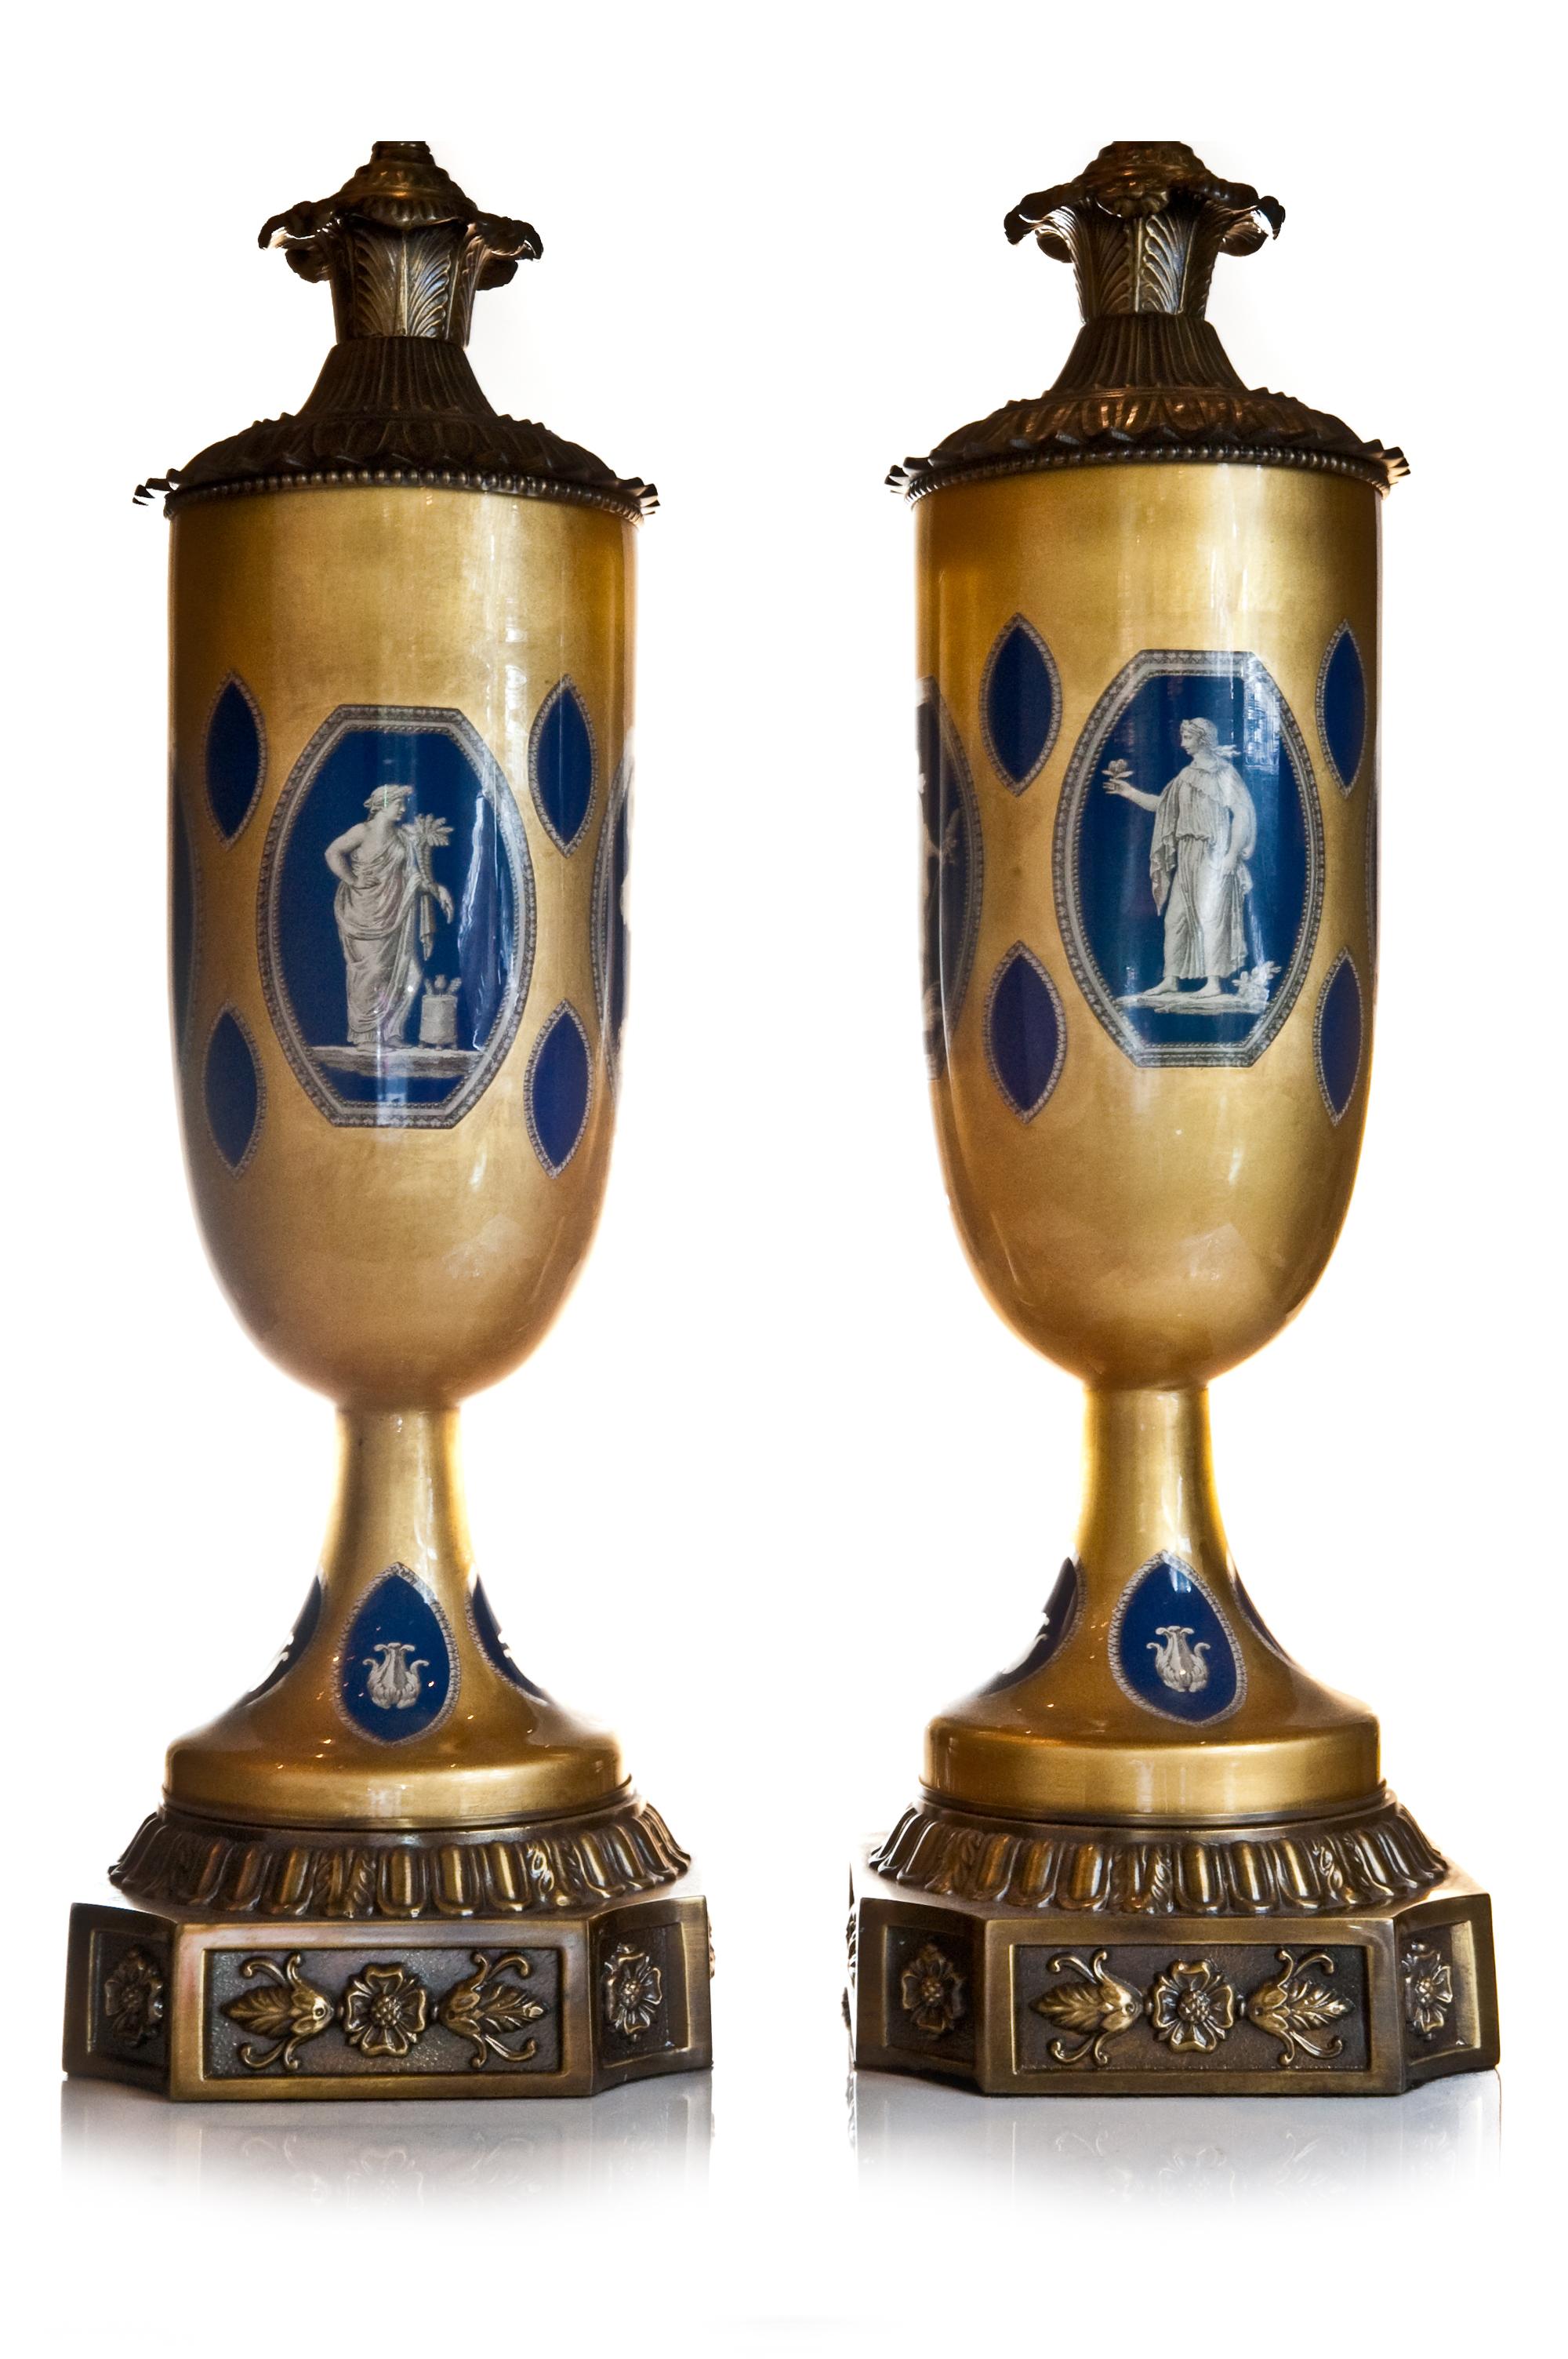 A pair of tall and very unique antique French Empire style neoclassical gilt and lapis blue bronze mounted églomisé hand painted and enameled lamps. Each unique lamp is embellished with figural scenes and musical instruments.